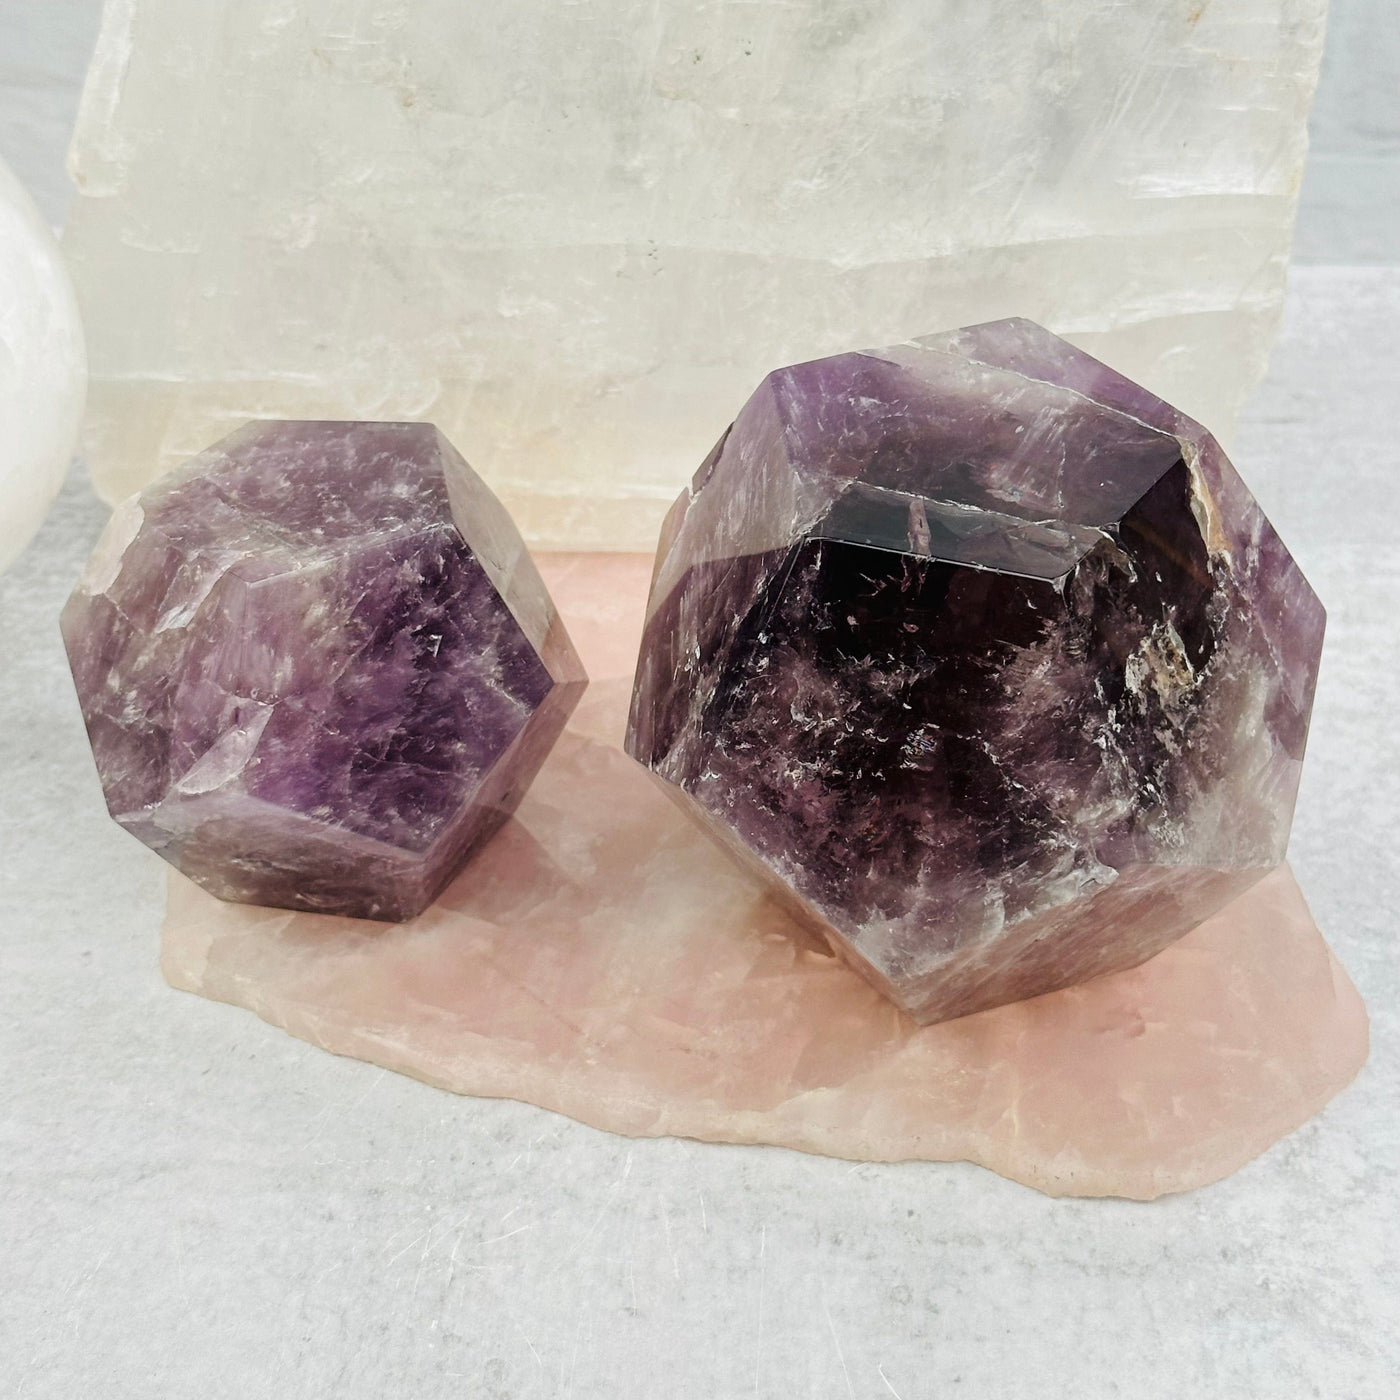 Amethyst Crystal Dodecahedron displayed as home decor